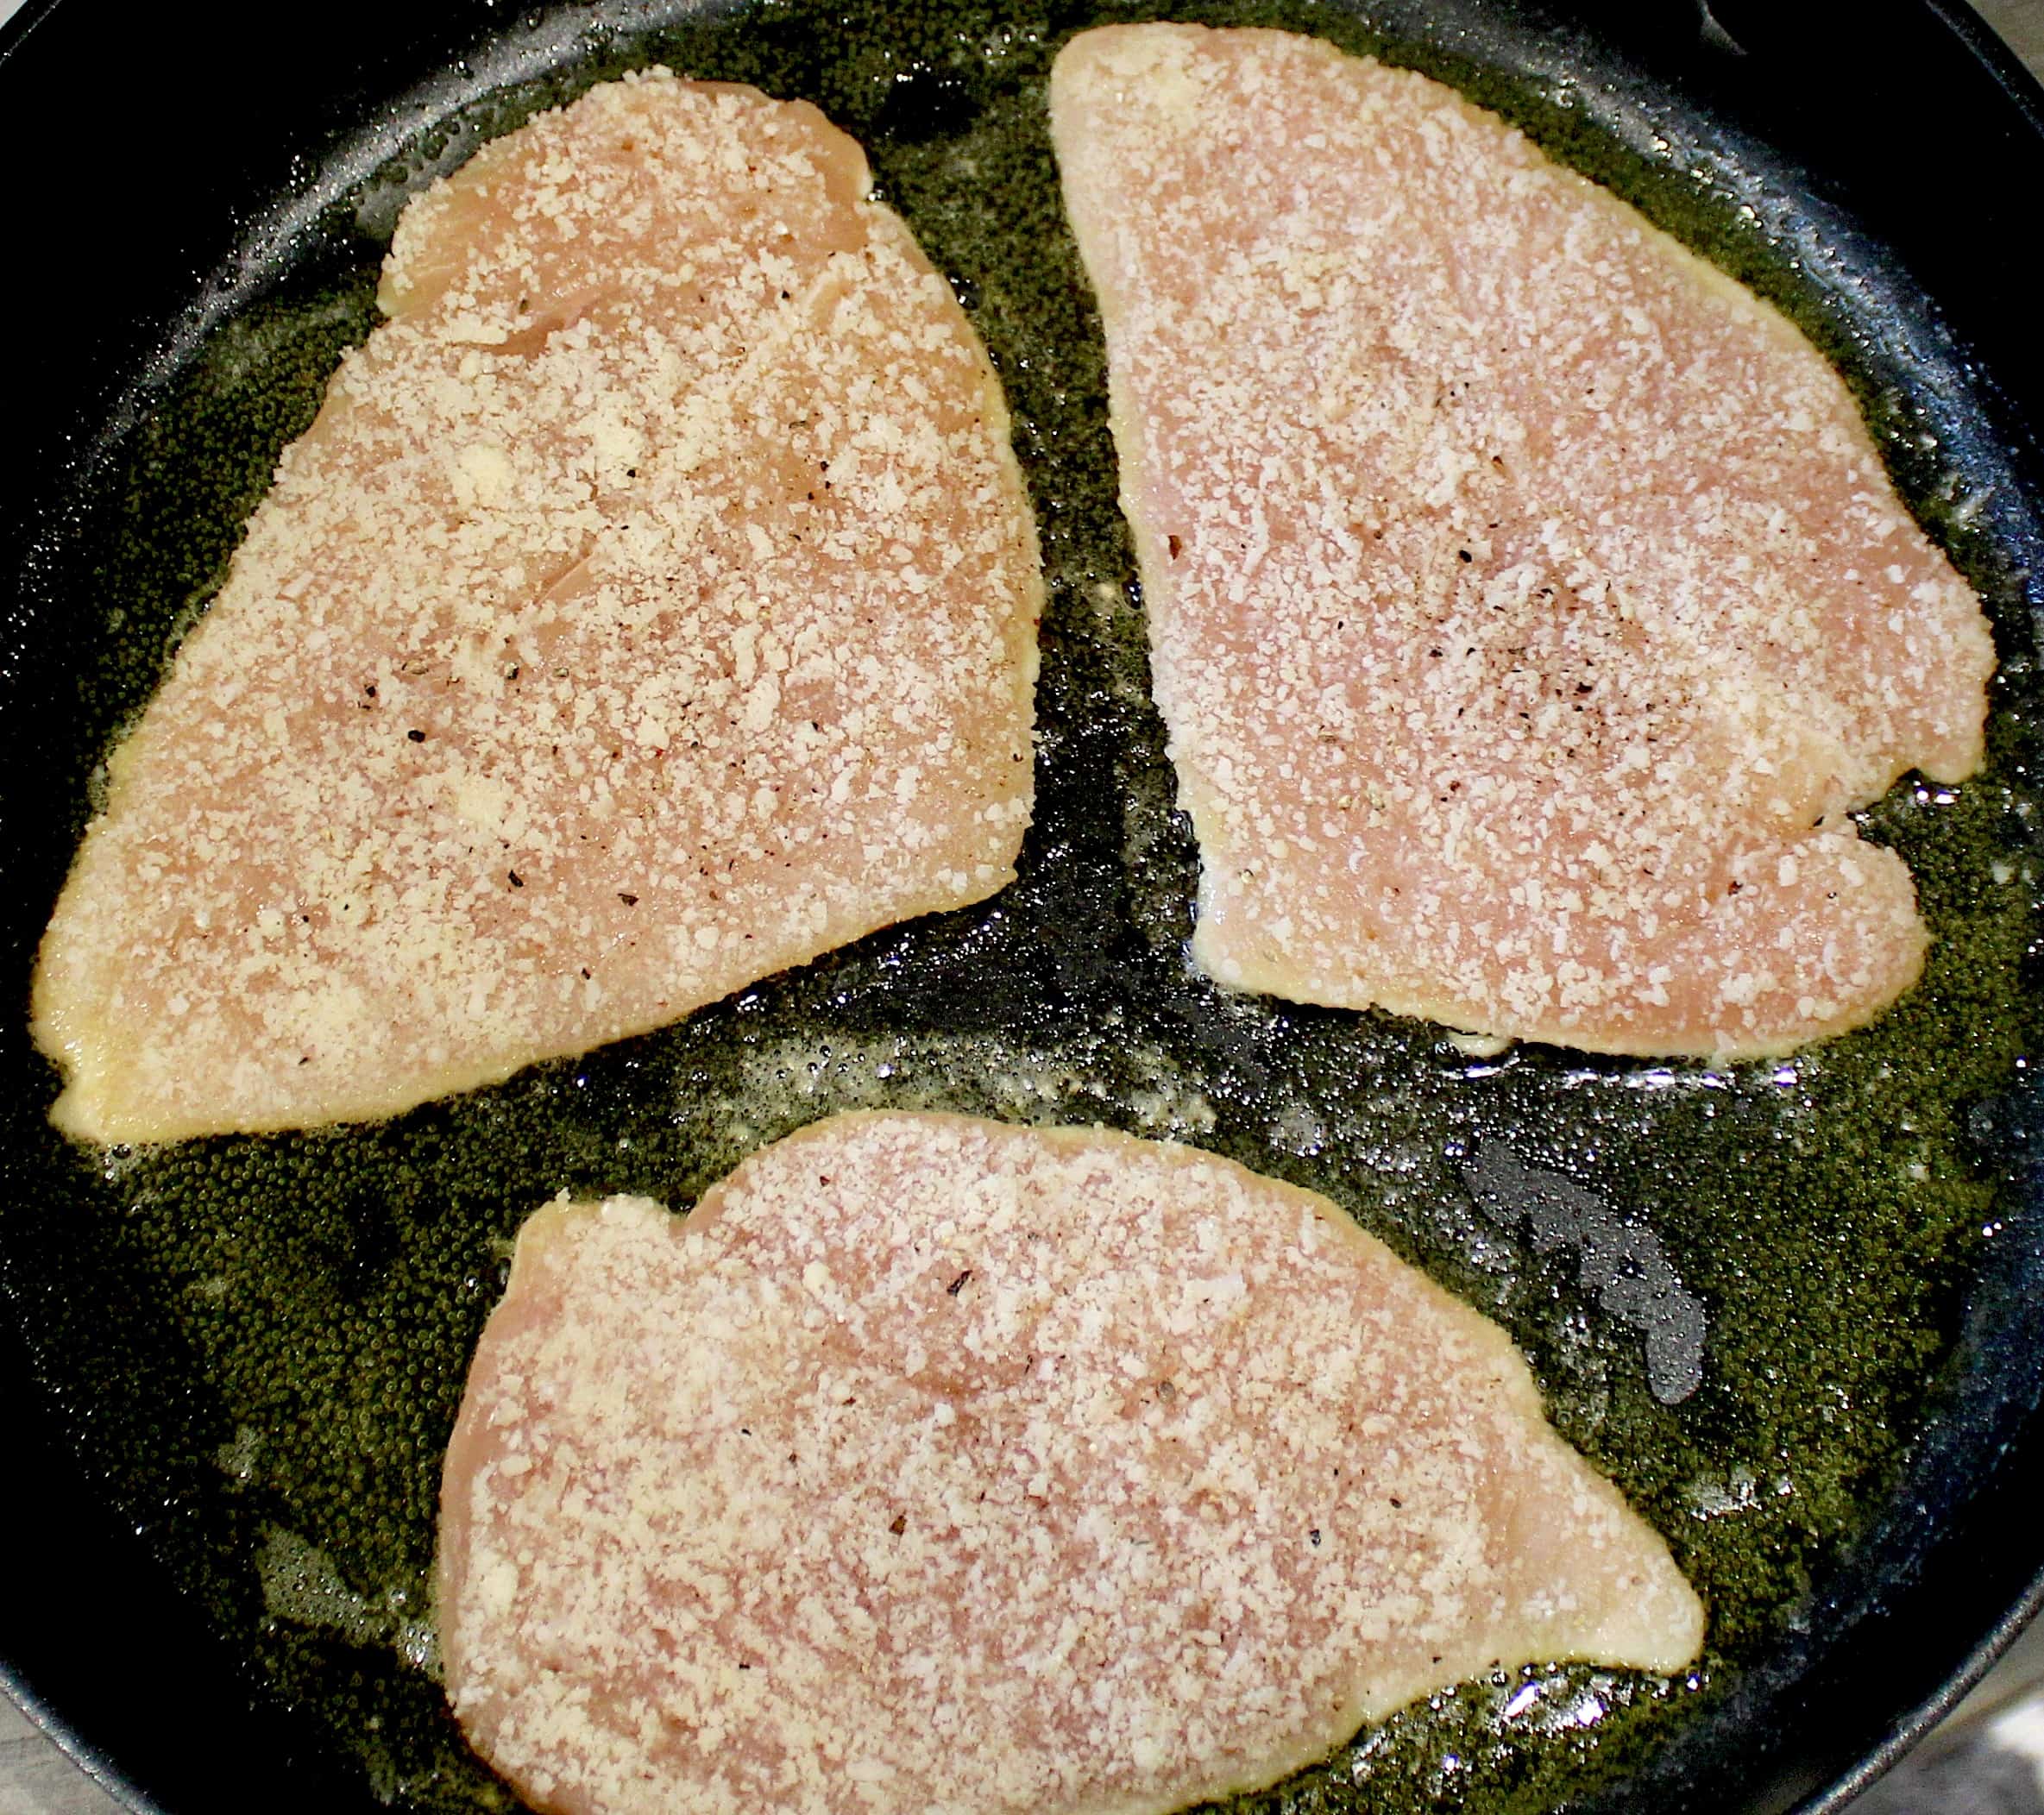 3 chicken breasts being cooked in skillet